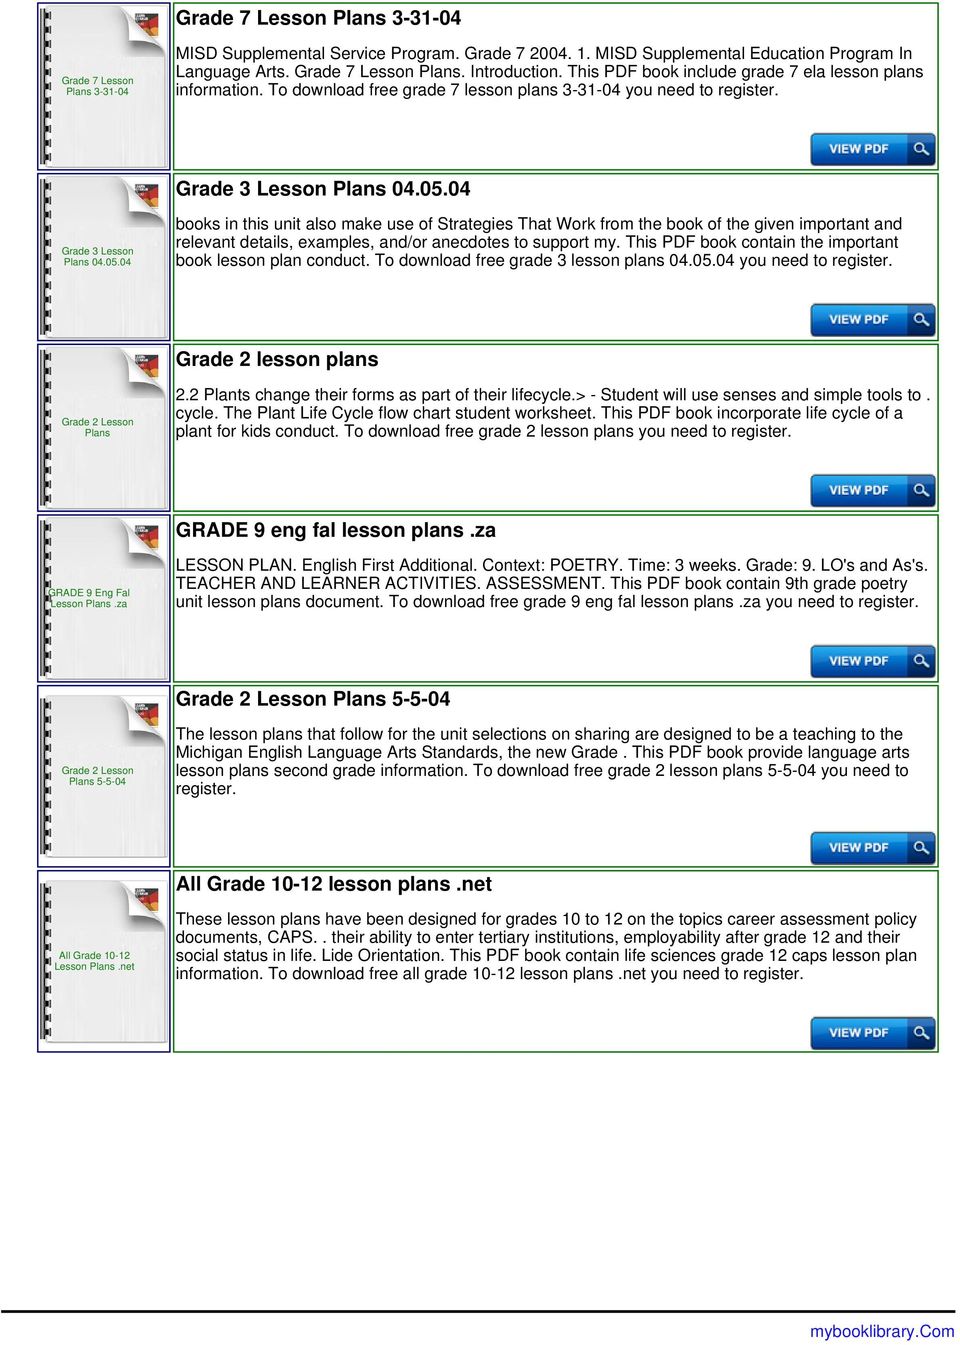 04 Grade 3 Lesson Plans 04.05.04 books in this unit also make use of Strategies That Work from the book of the given important and relevant details, examples, and/or anecdotes to support my.